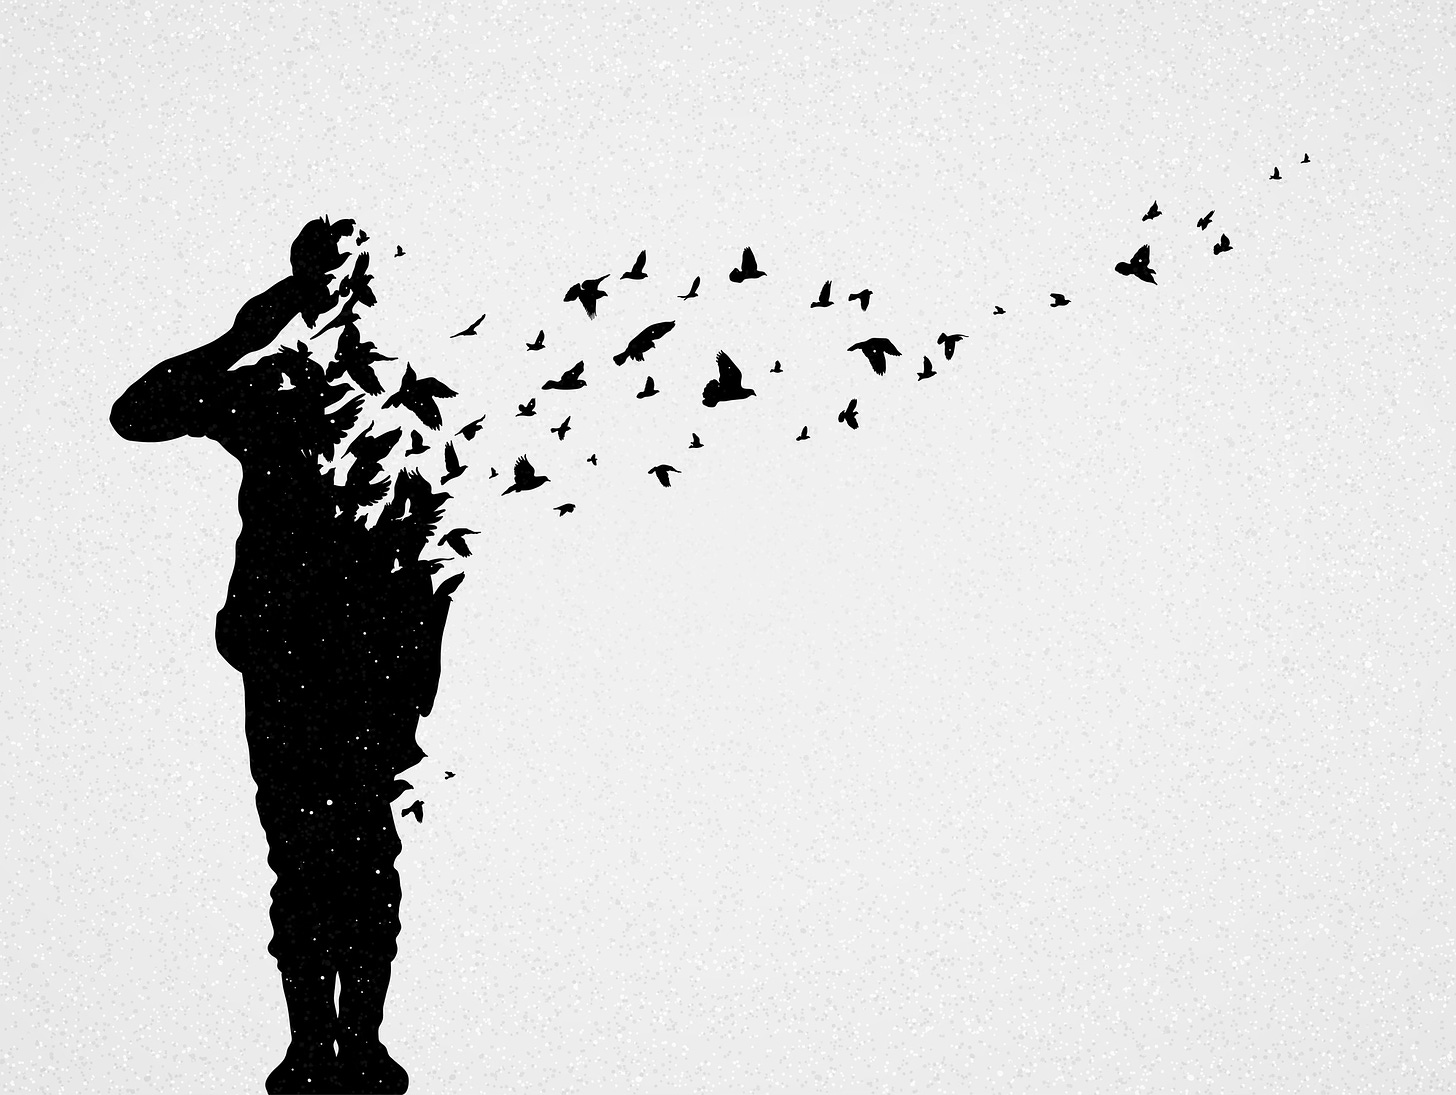 silhouette of a soldier saluting while he fragments into birds flying away